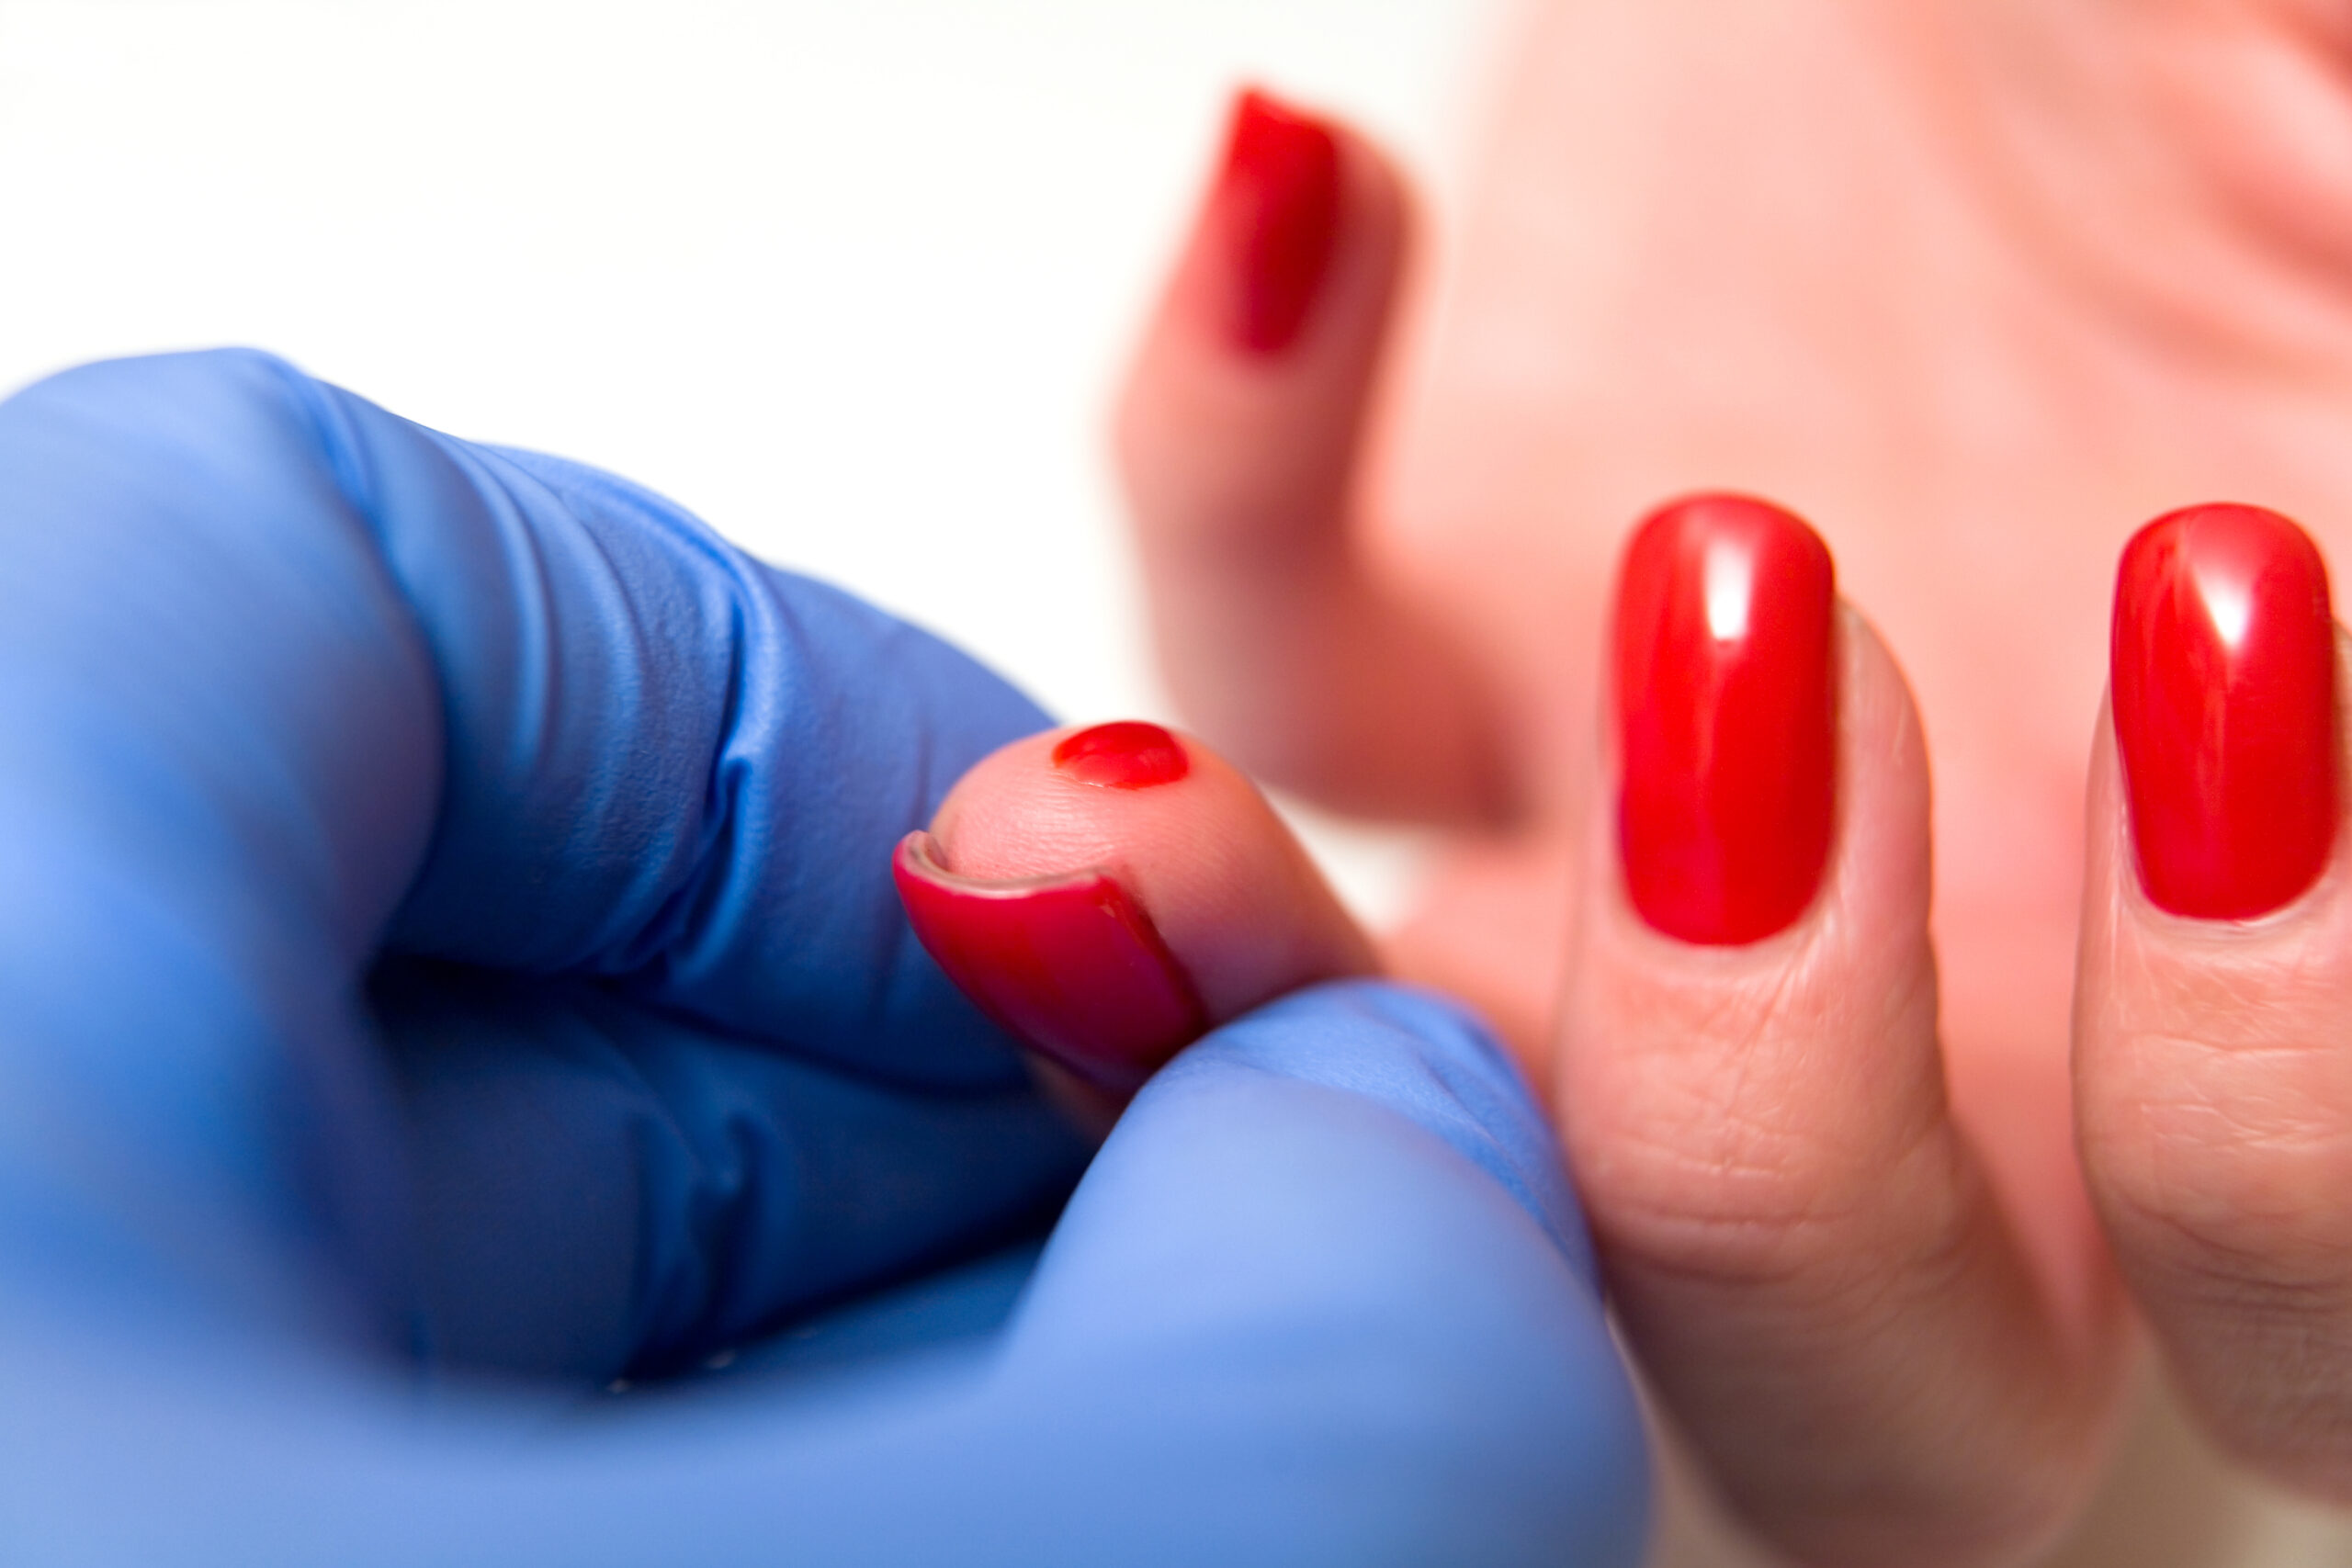 Girl,With,A,Red,Manicure,Gives,A,Blood,Test,From